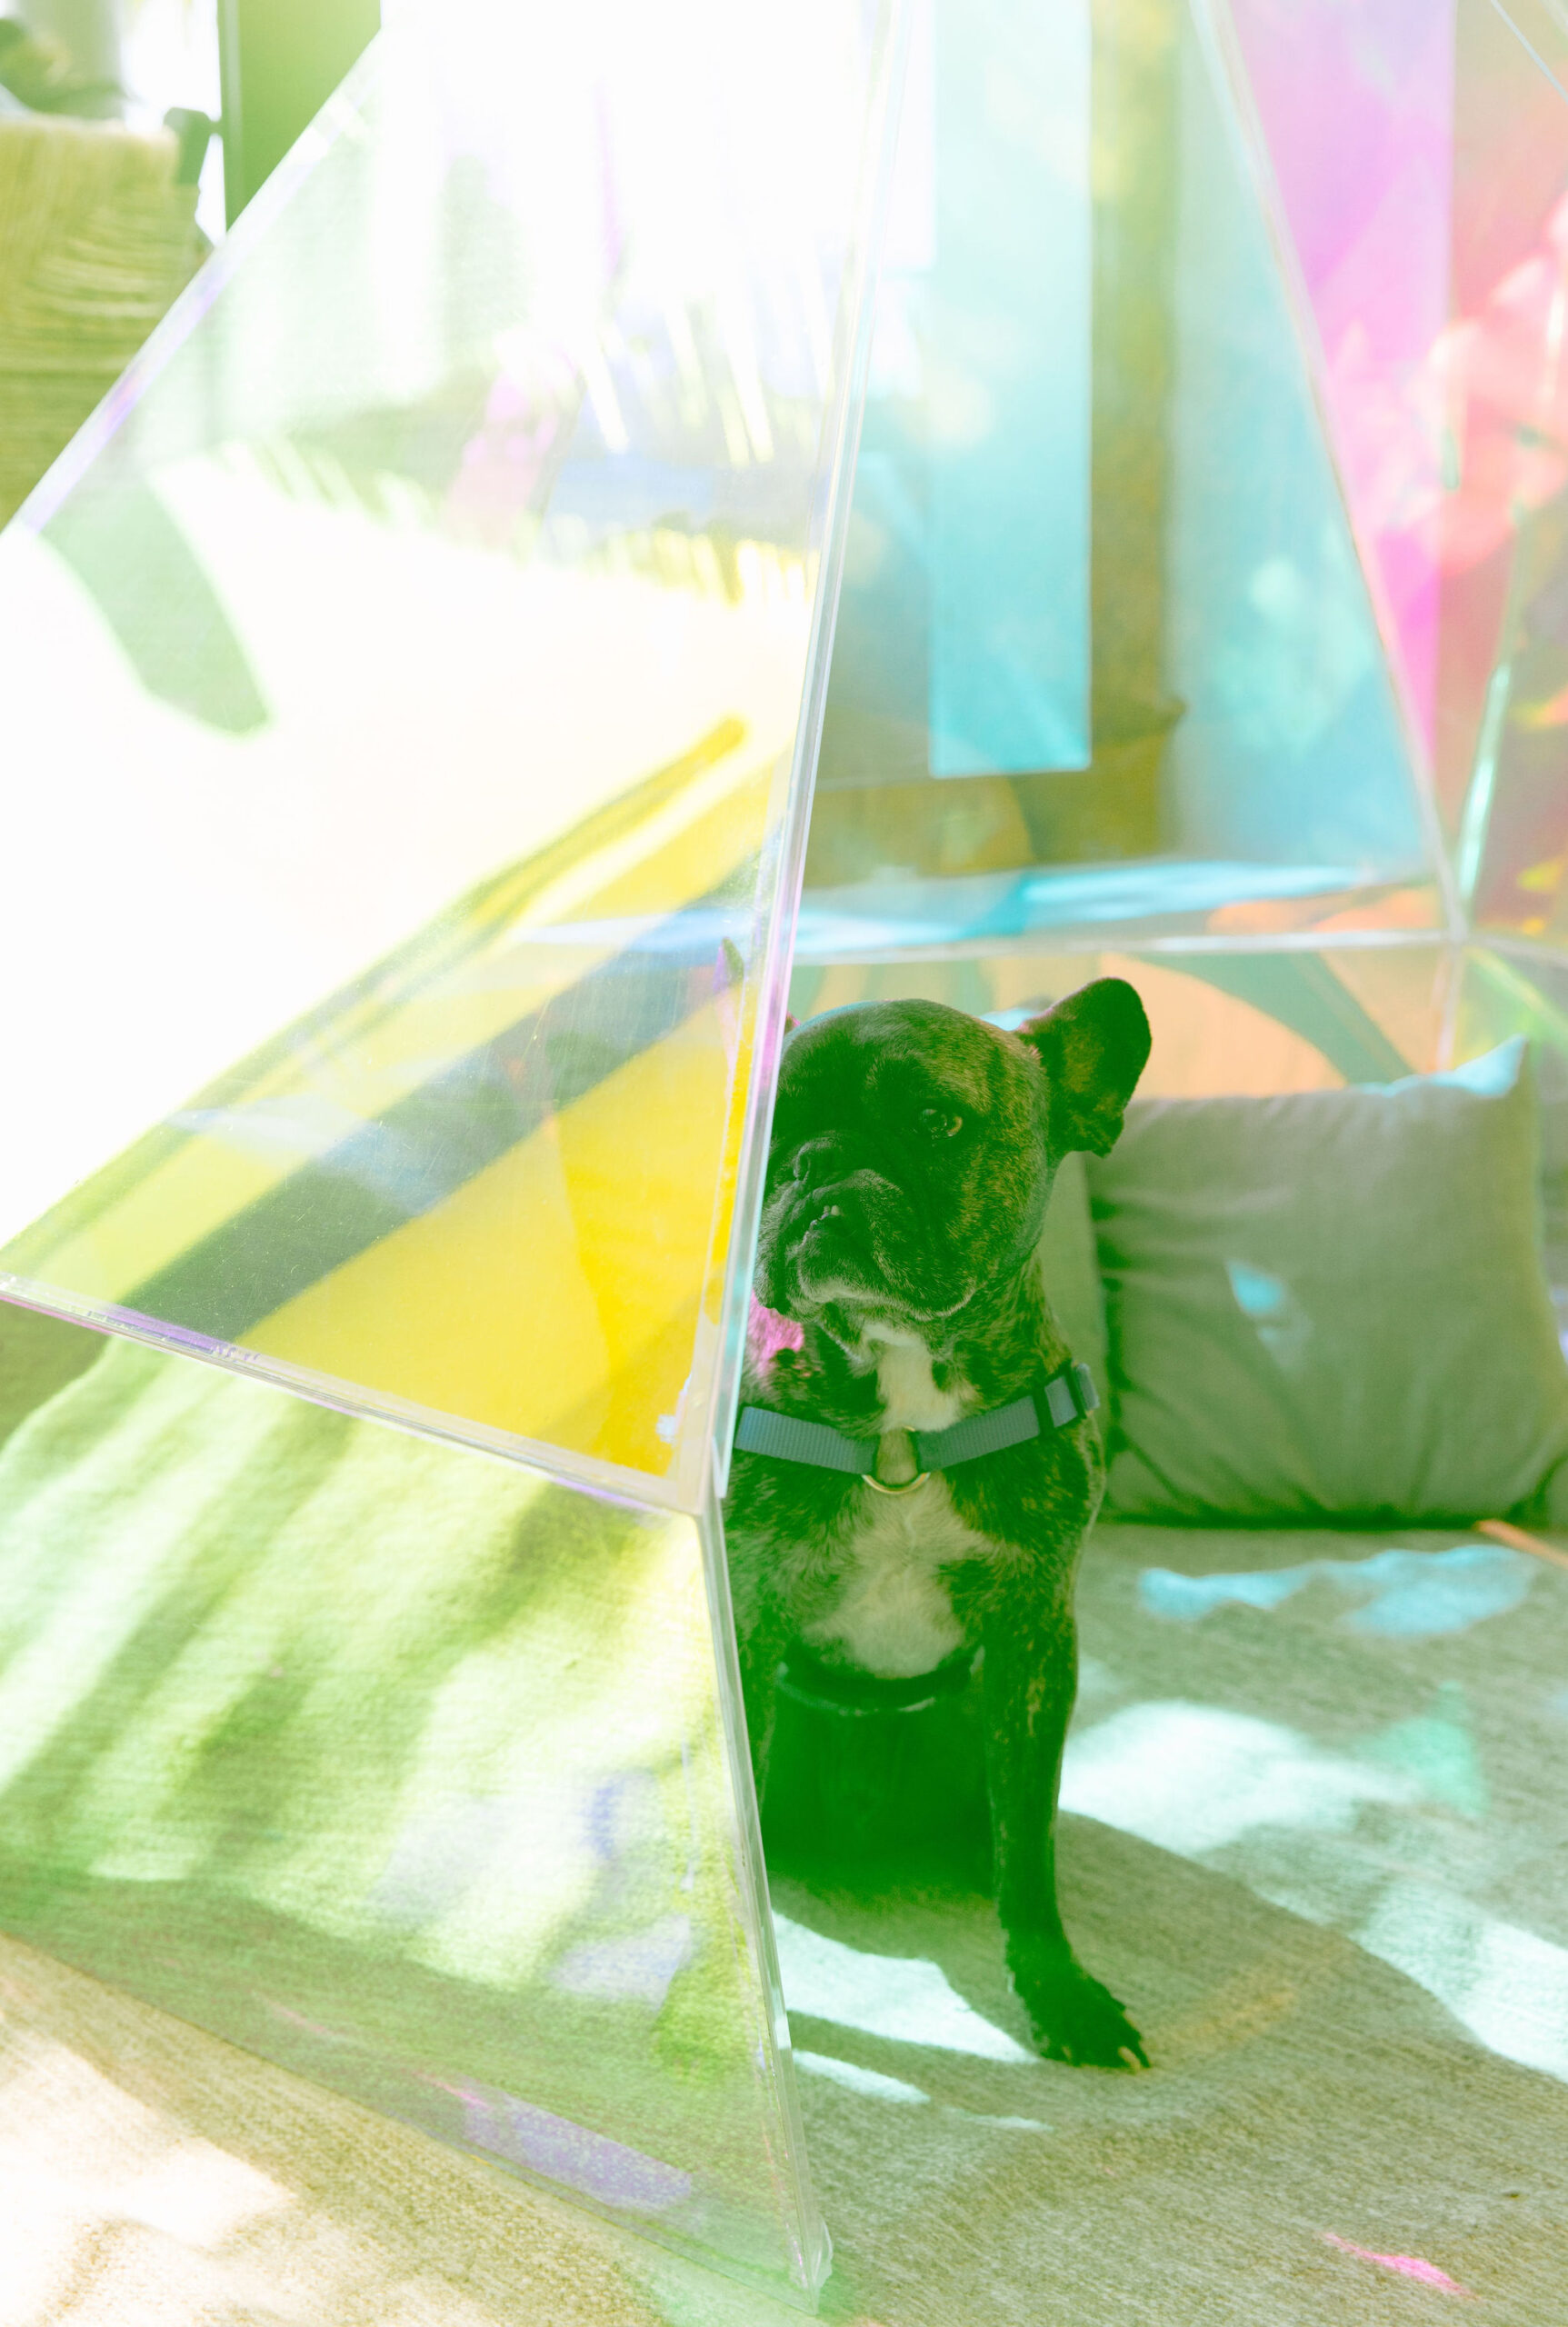 Brindle french bulldog inside a geometric iridescent triangular dome with a floor cushion. Film style photo with grainy filter.